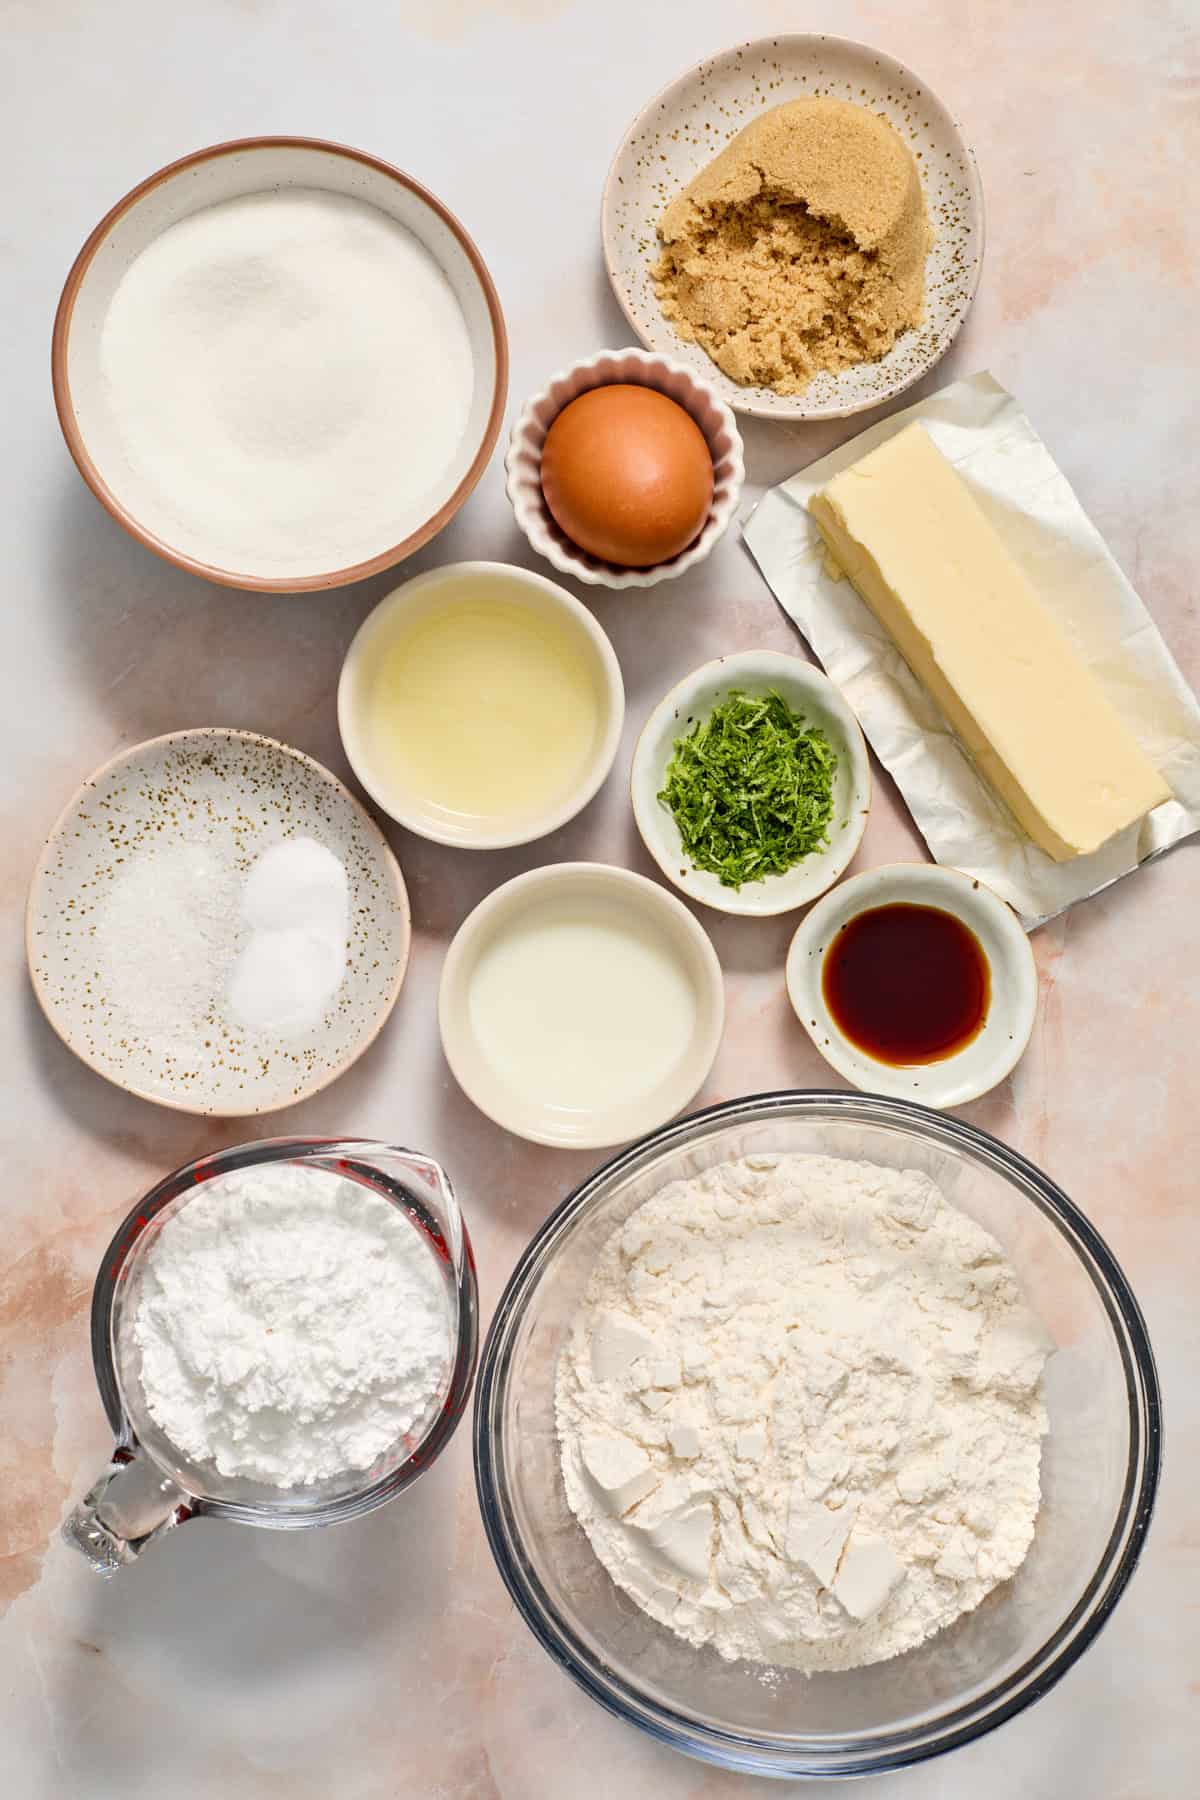 Butter, flour, sugar, vanilla, lime zest and other ingredients arranged on surface.